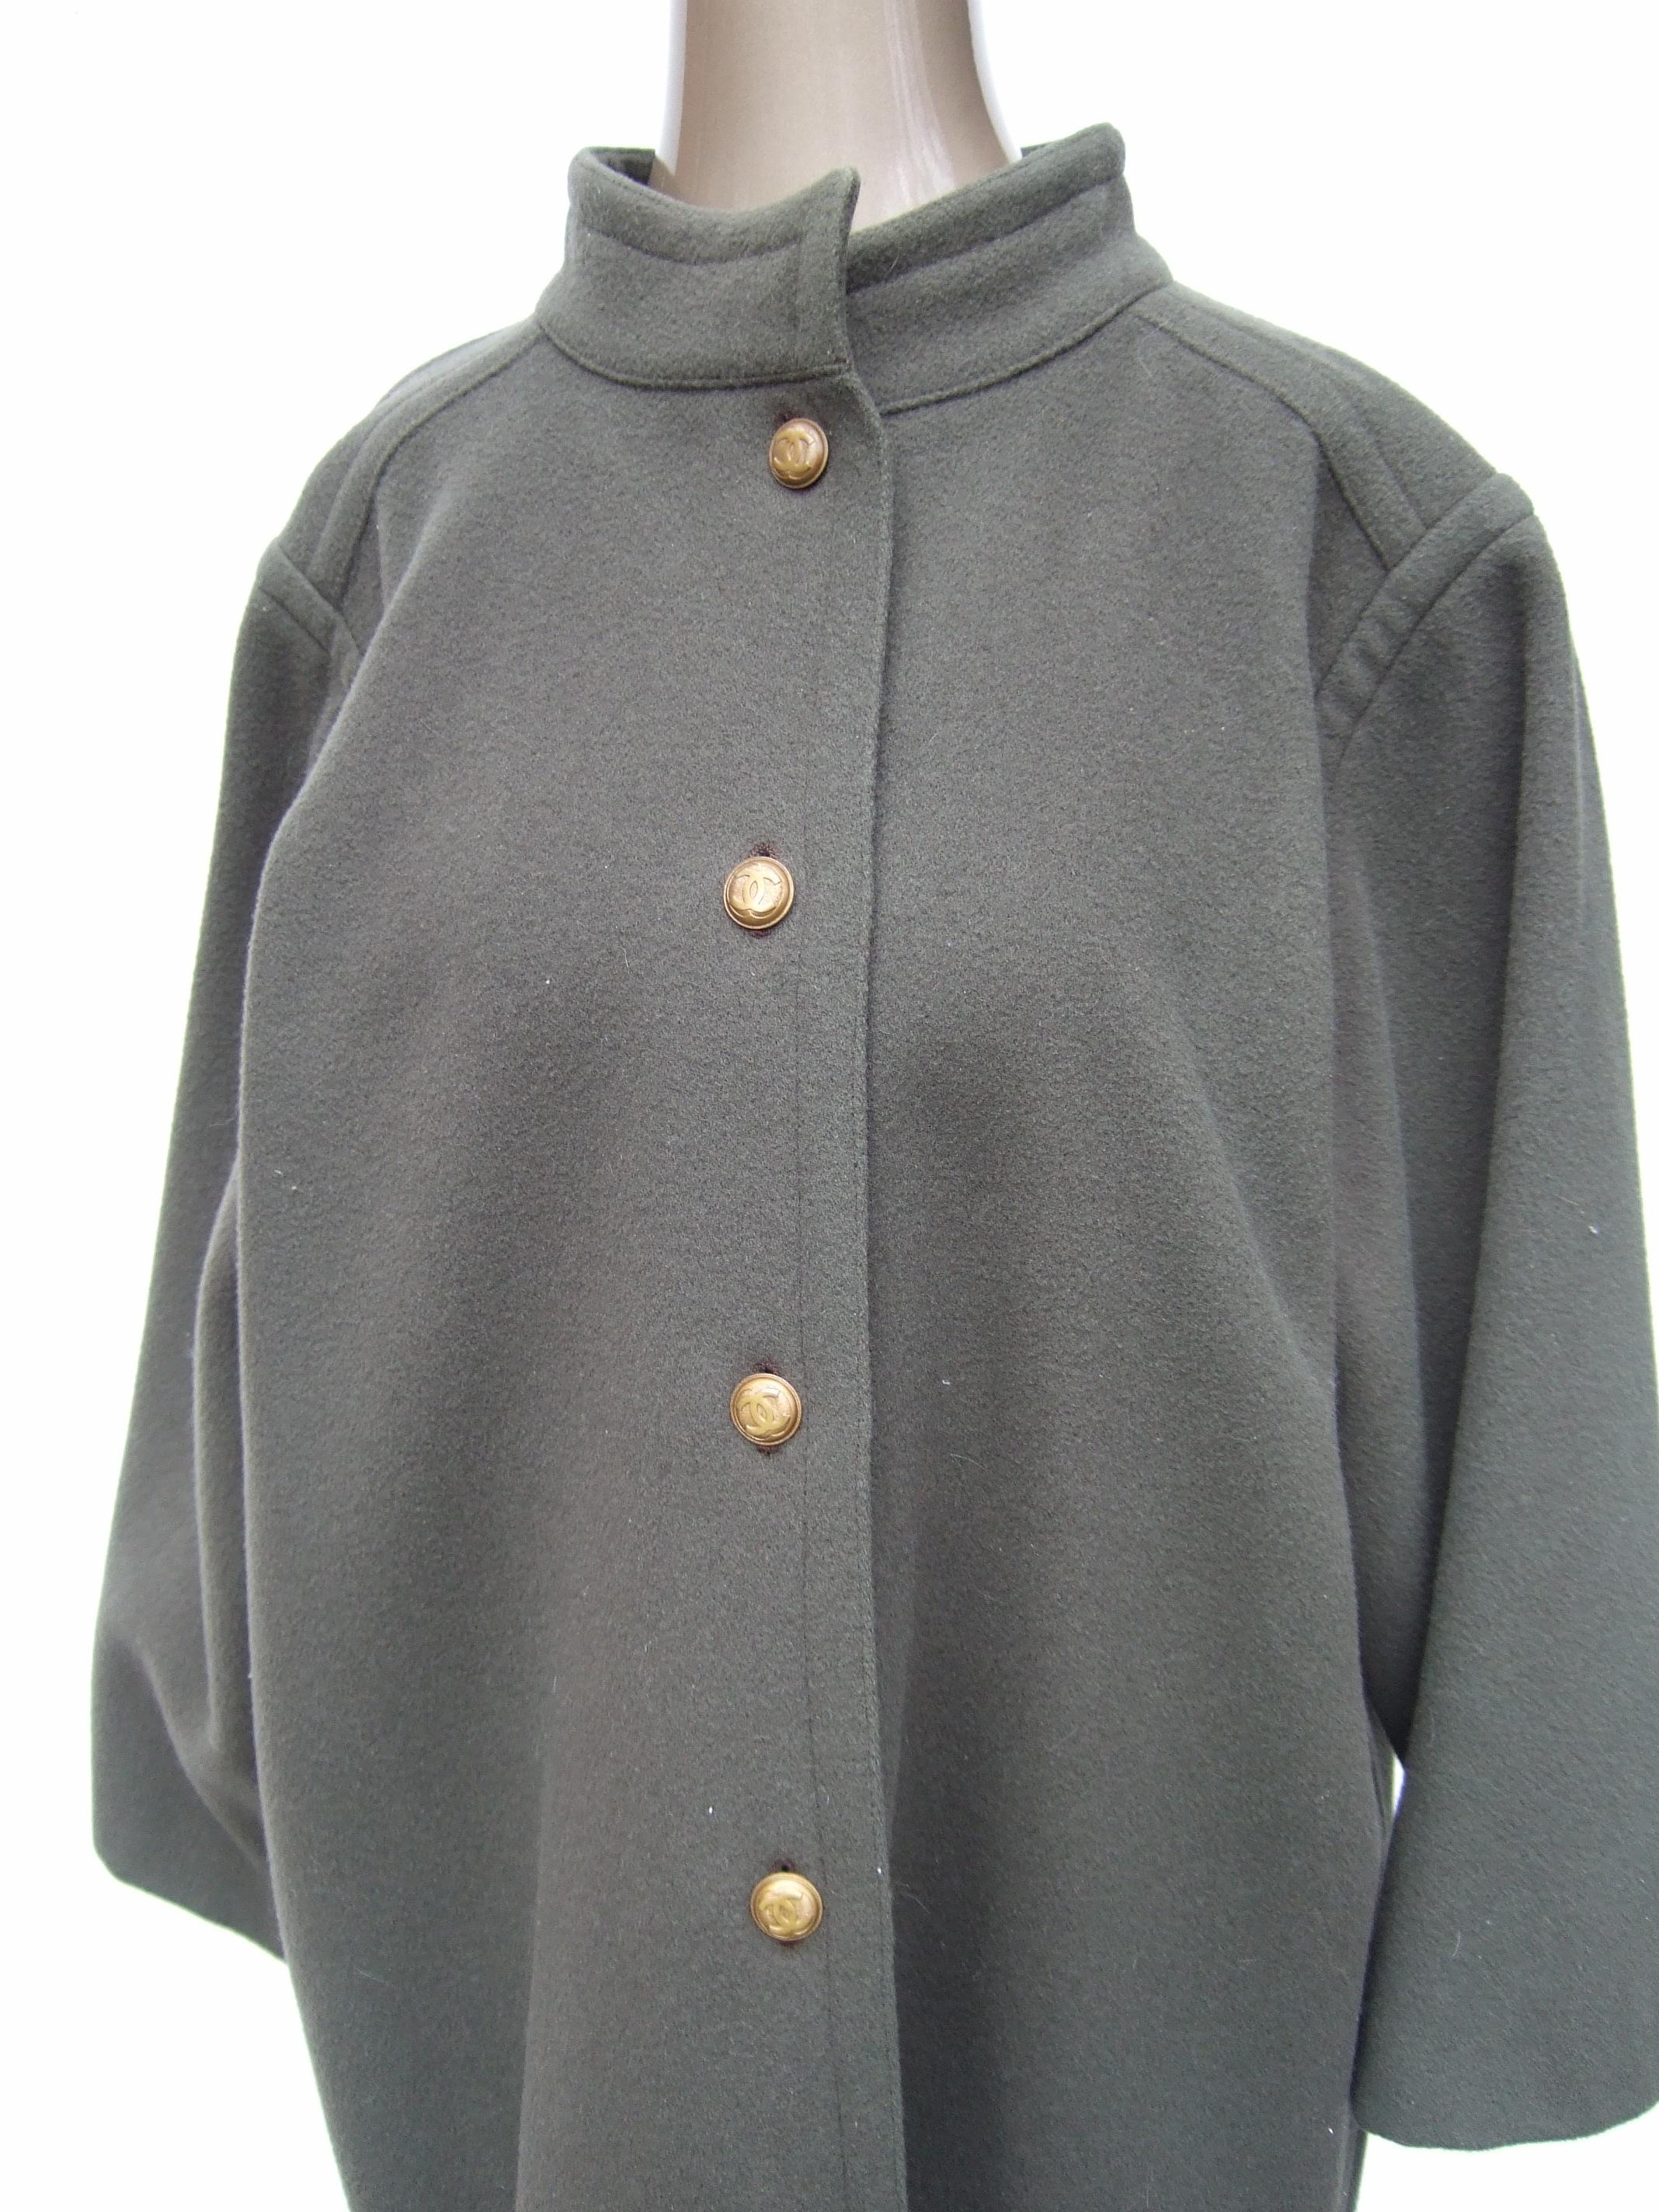 CHANEL Creations Muted Gray - Green Wool Coat with C.C. Buttons c 1980s For Sale 5